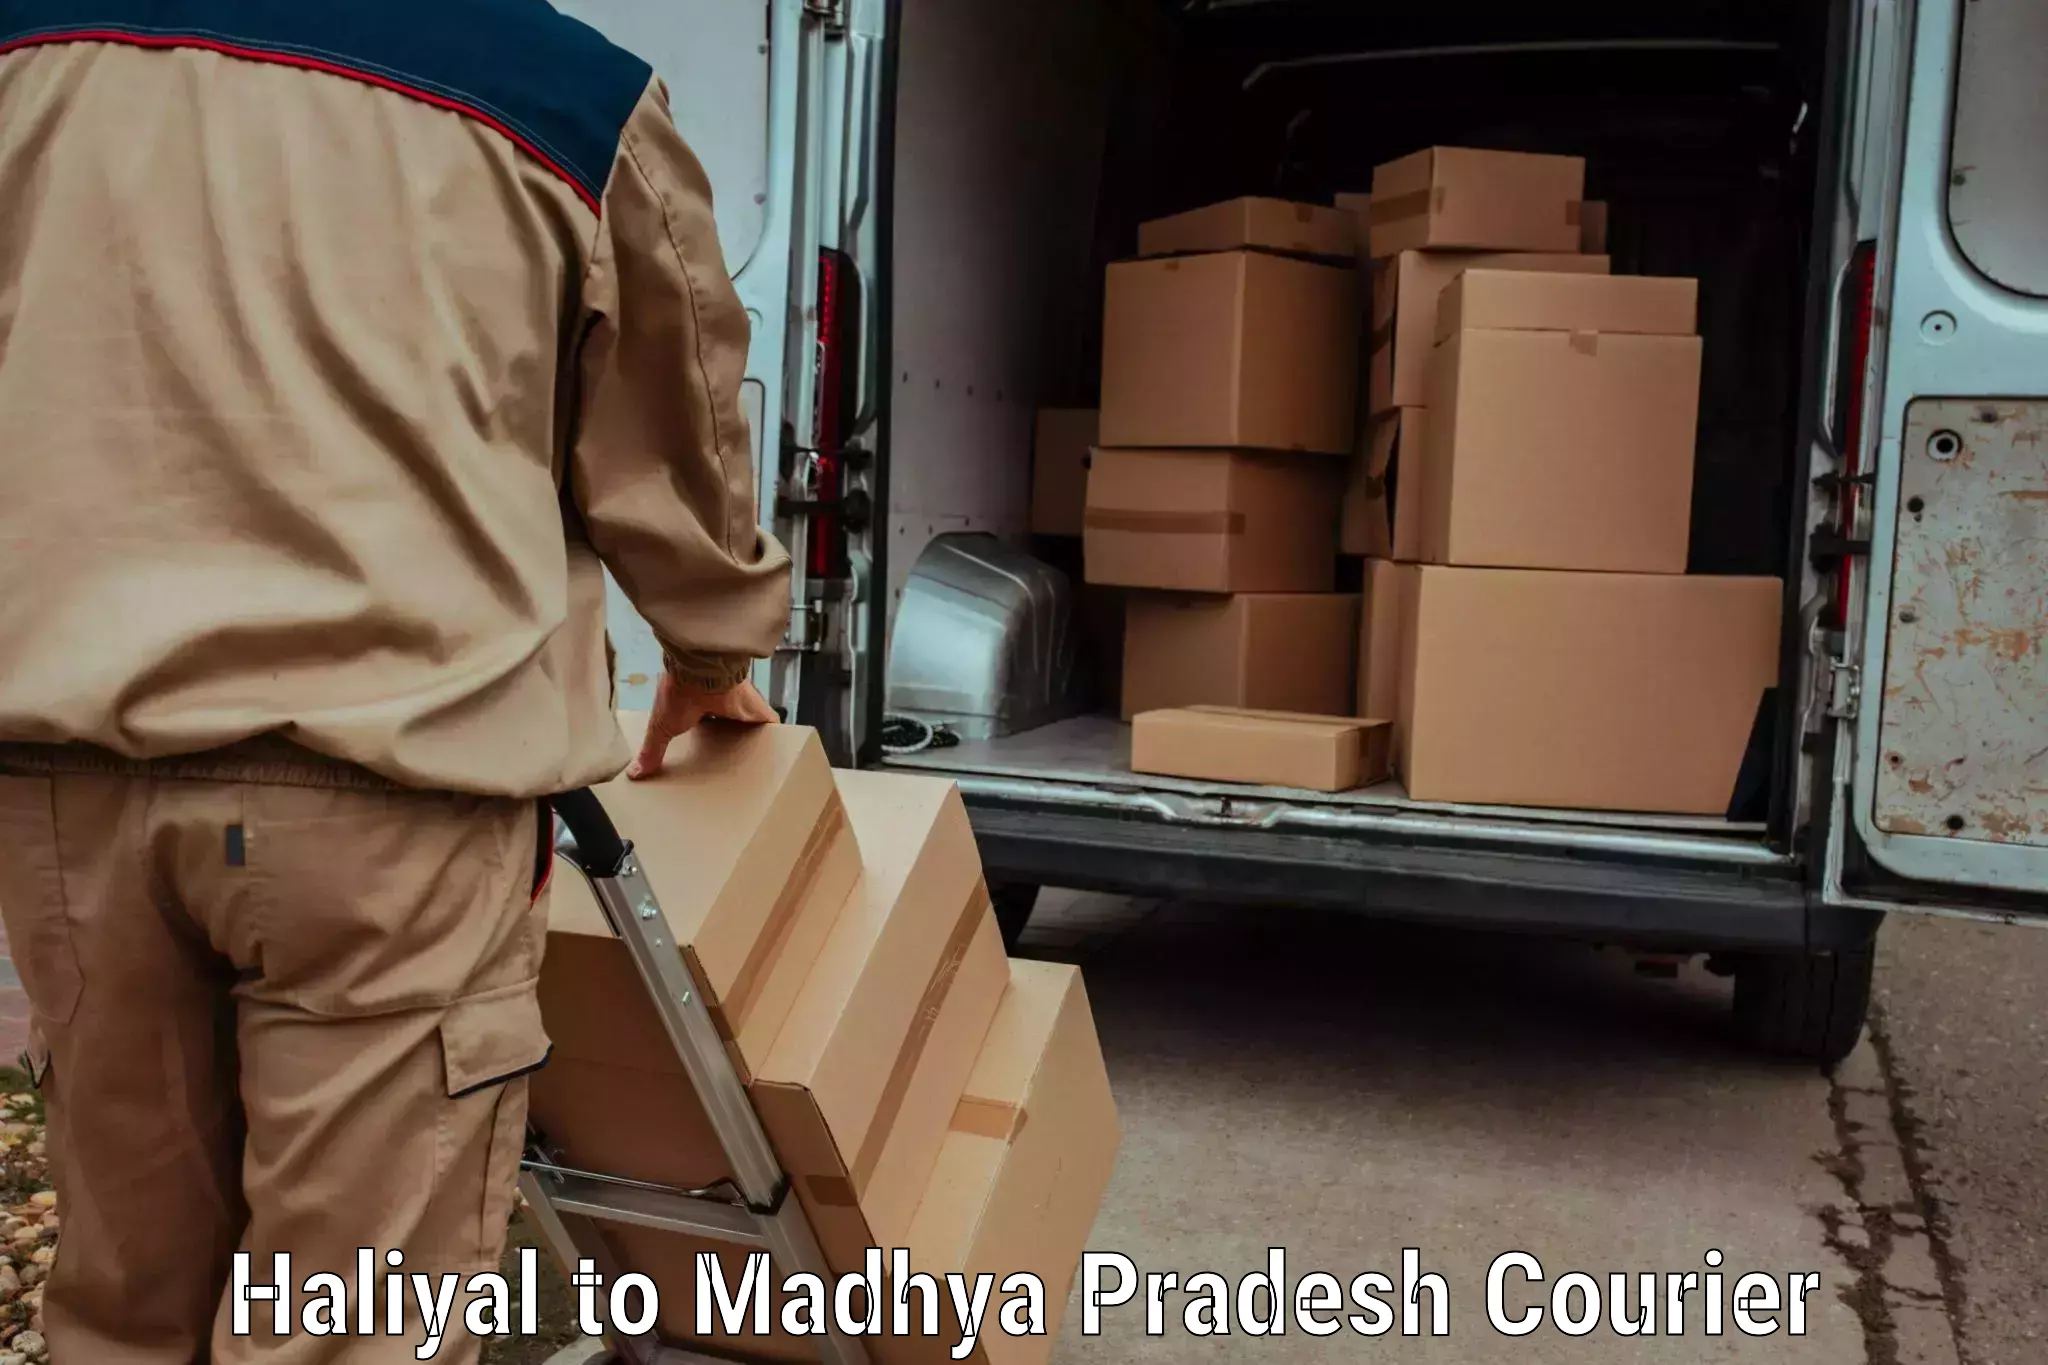 On-call courier service Haliyal to Chapda